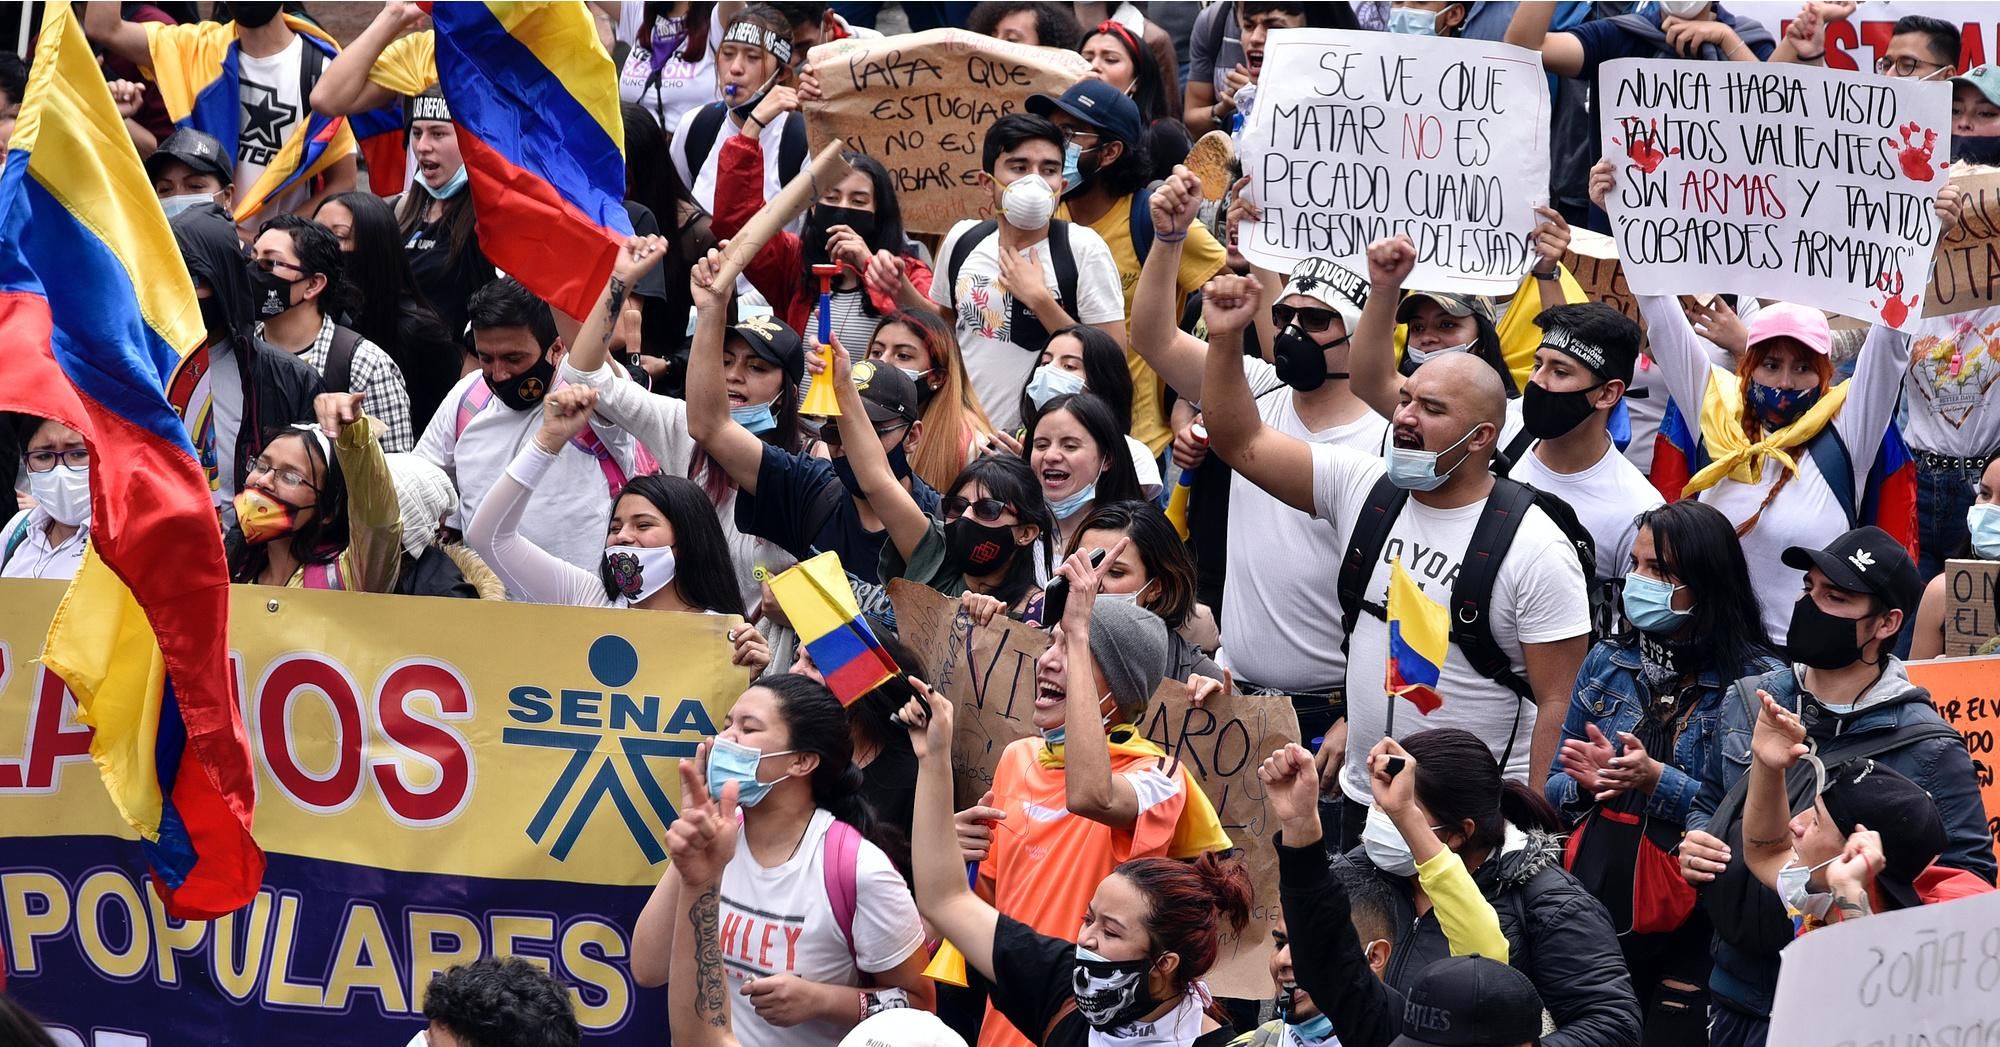 Protesters rally in the Colombian capital Bogotá on May 5, 2021, the eighth day of a national strike that has been brutally repressed by state security forces. (Photo: Guillermo Legaria/Getty Images) 